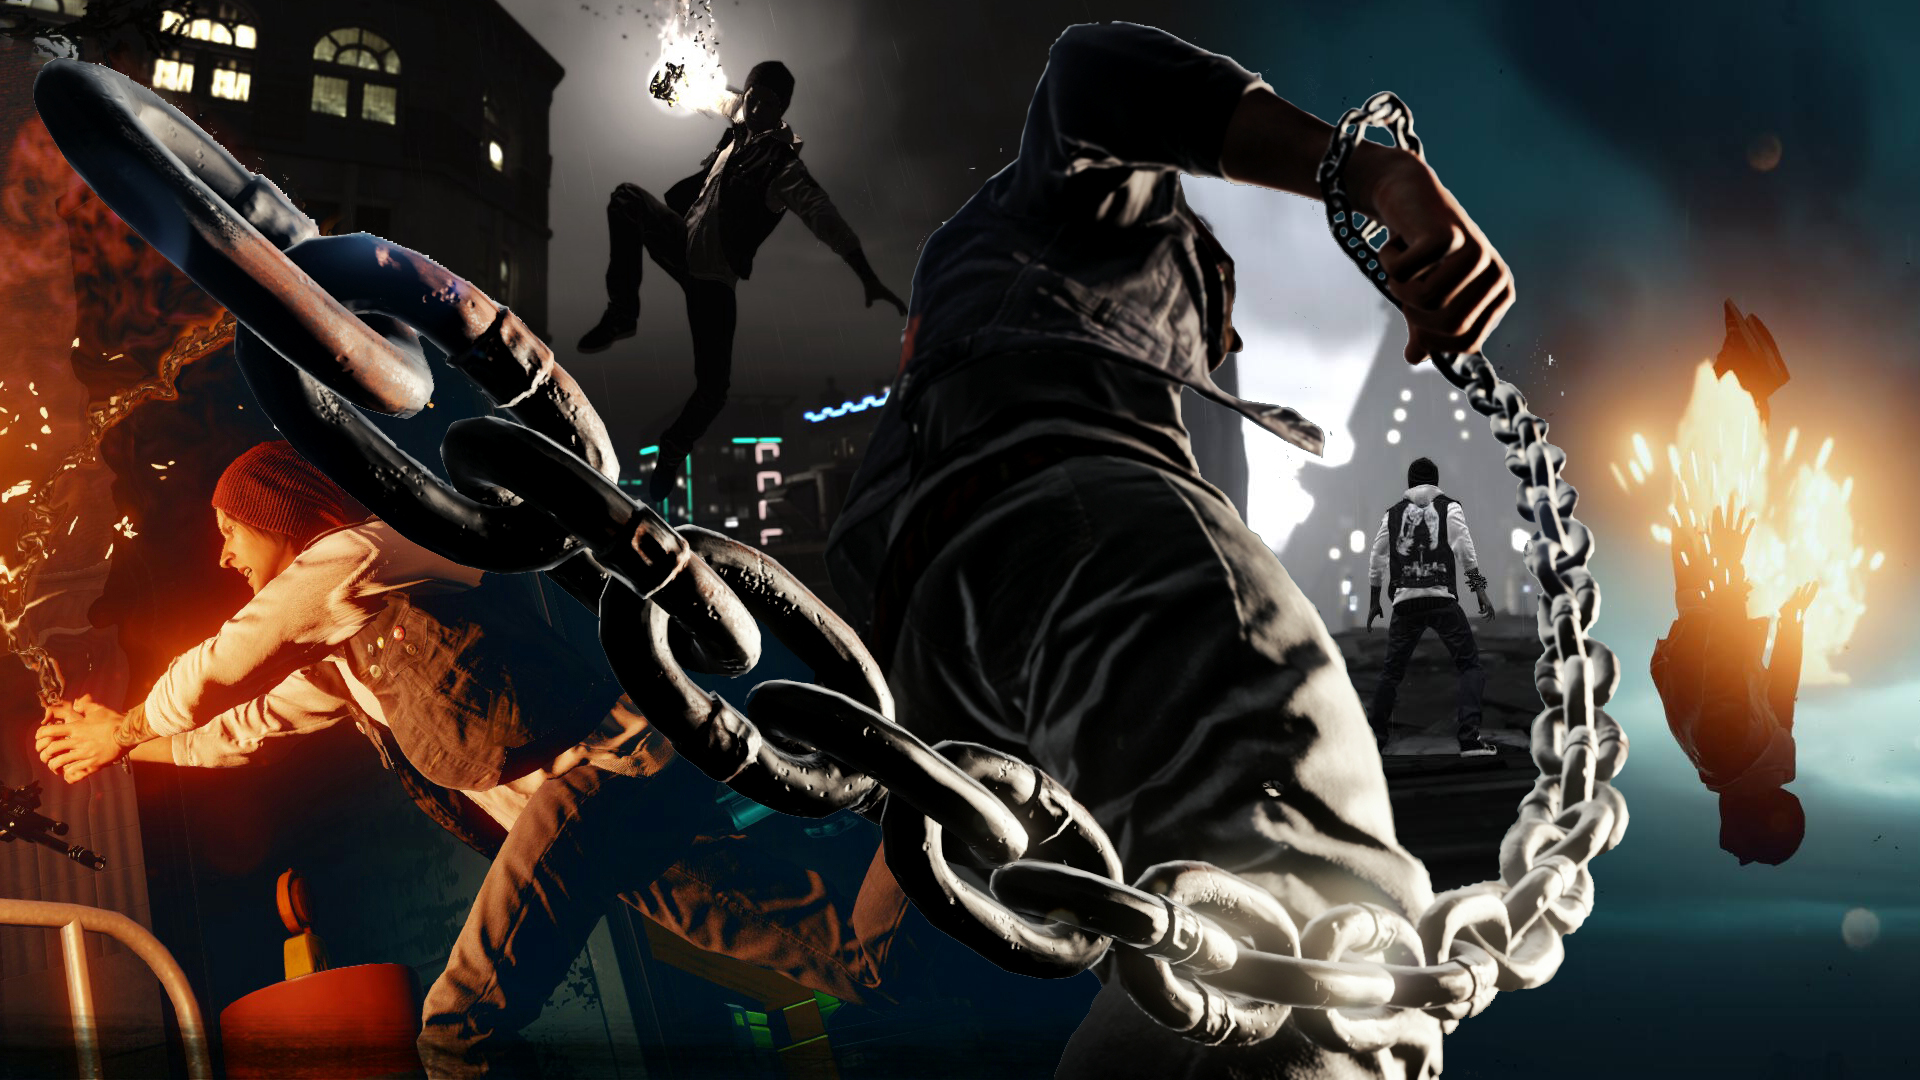 HD wallpaper infamous second son  Wallpaper Flare